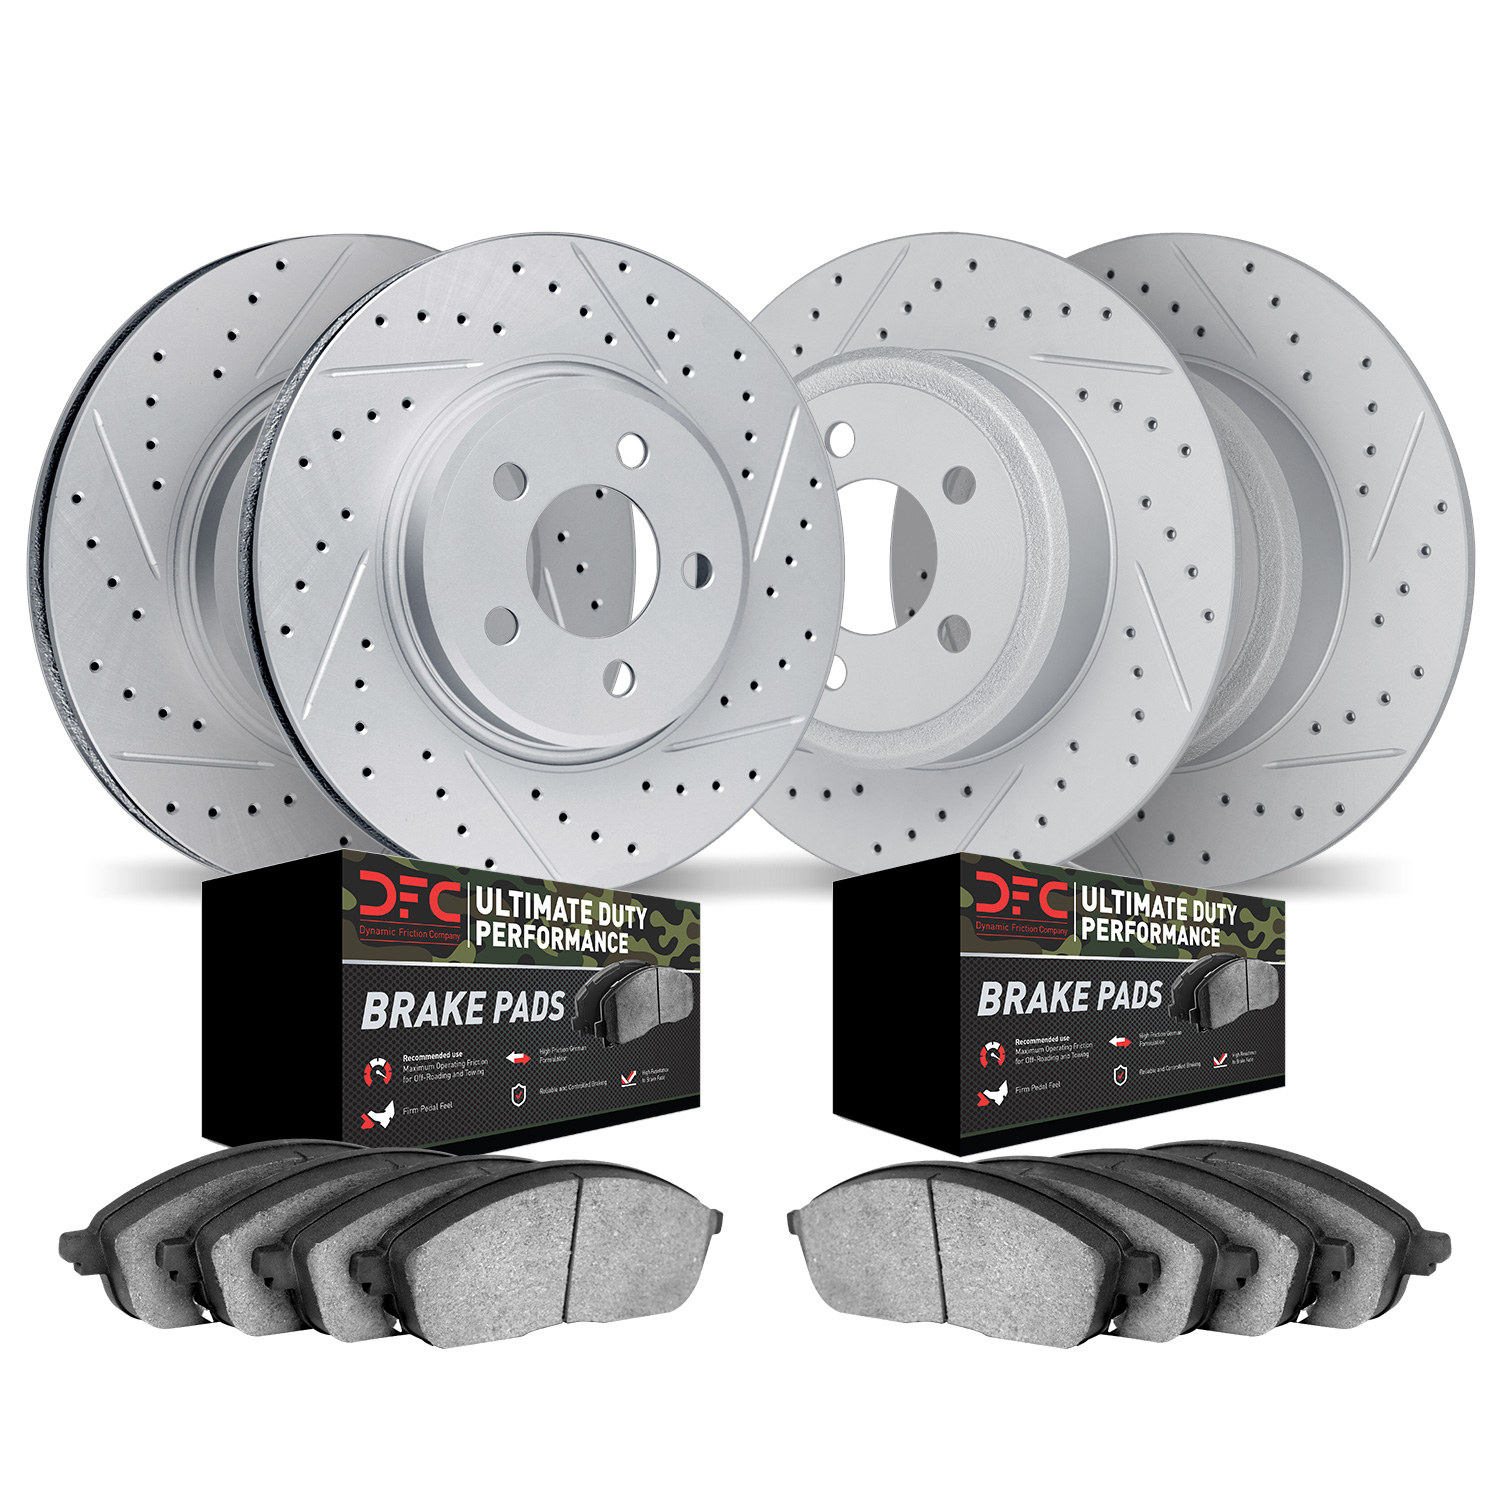 2404-54021 Geoperformance Drilled/Slotted Brake Rotors with Ultimate-Duty Brake Pads Kit, 1997-2002 Ford/Lincoln/Mercury/Mazda,